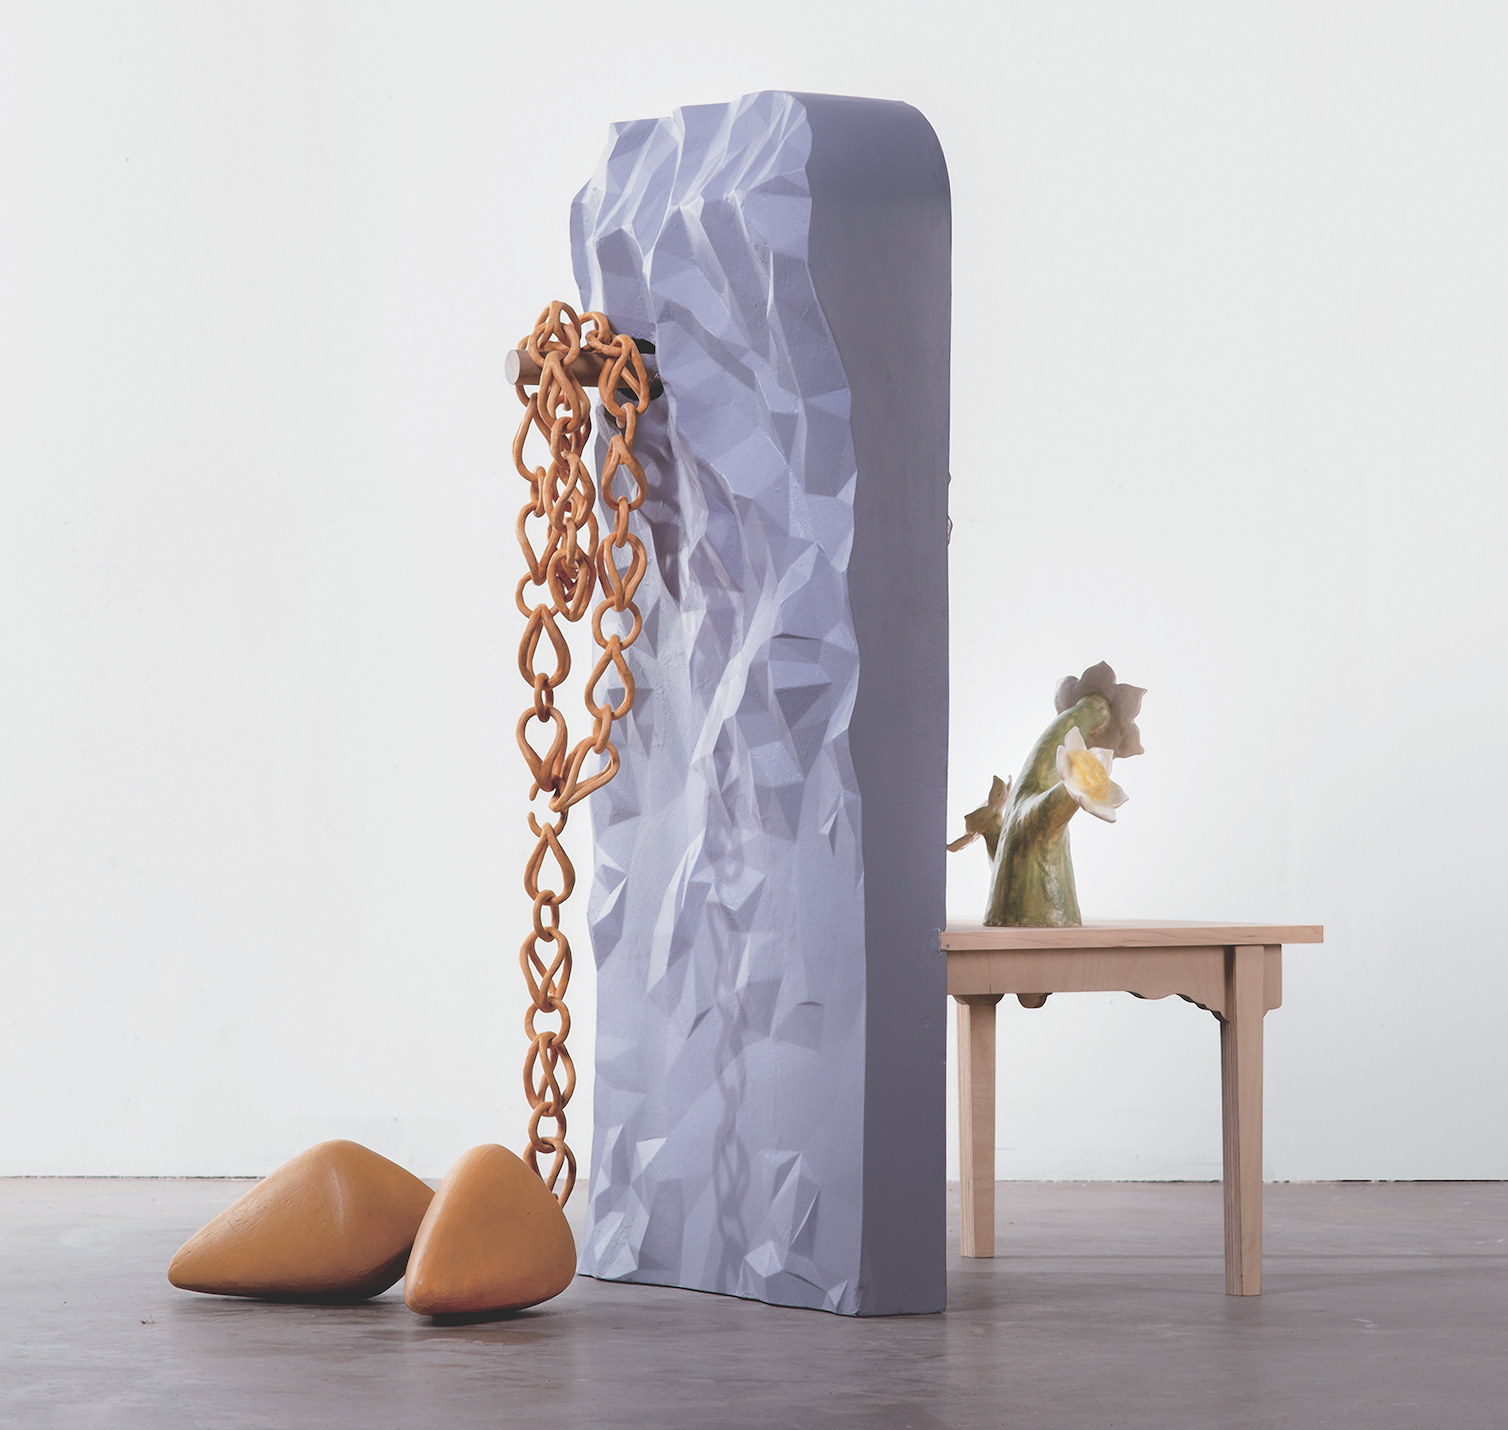 1 Audrey An’s Still Life Chair, 4 ft. (1.2 m) in height, handbuilt stoneware, gas fired to cone 04, CNC-milled foam, plywood, 2022. Photo: Andrew Castañeda.